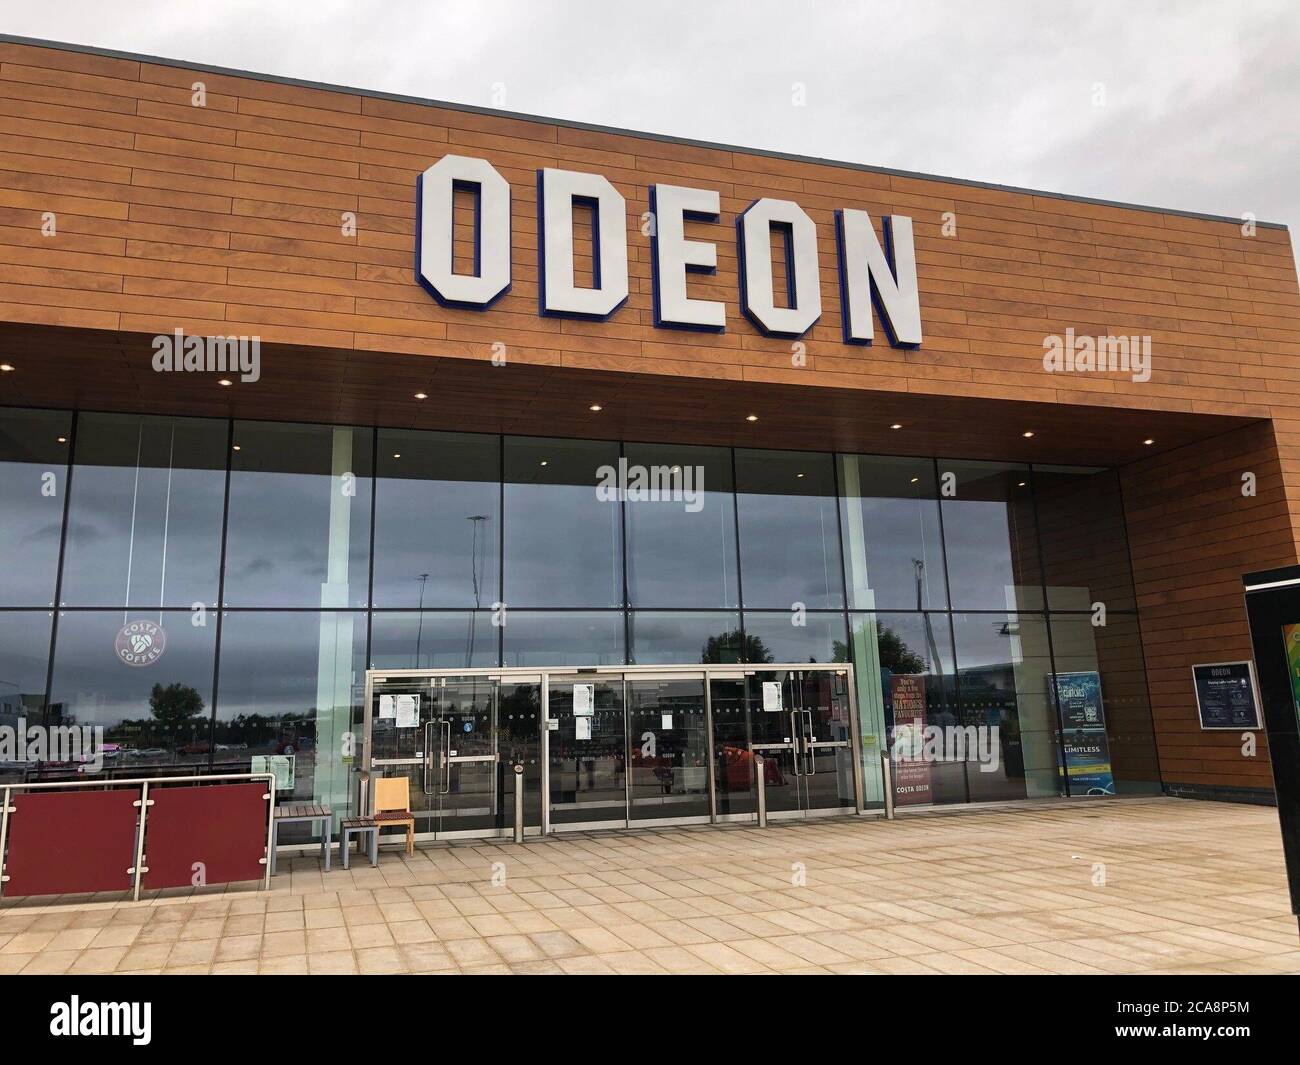 The Odeon cinema in Fort Kinnaird, Edinburgh, where a jury was able to watch a mock trial unfold on the big screen and allowed for social distancing between jurors, according to Brian McConnachie QC. Stock Photo